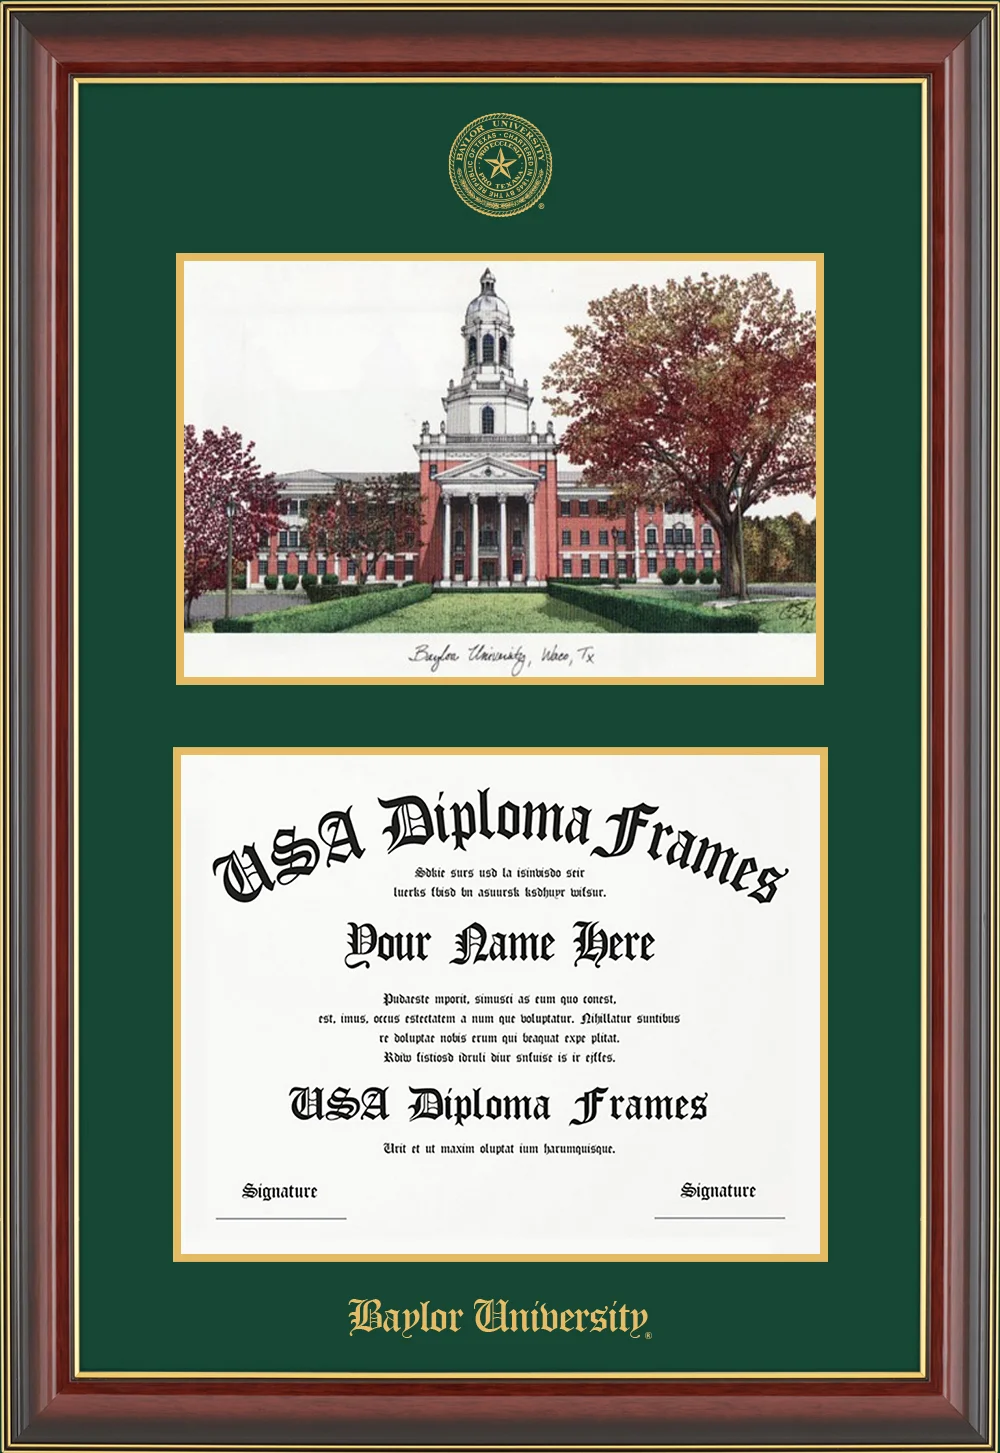 LIthograph - Cherry Mahogany Gold Trim Glossy Moulding - Green Mat - Gold Accent Mat - Baylor University Embossing Diploma Frame